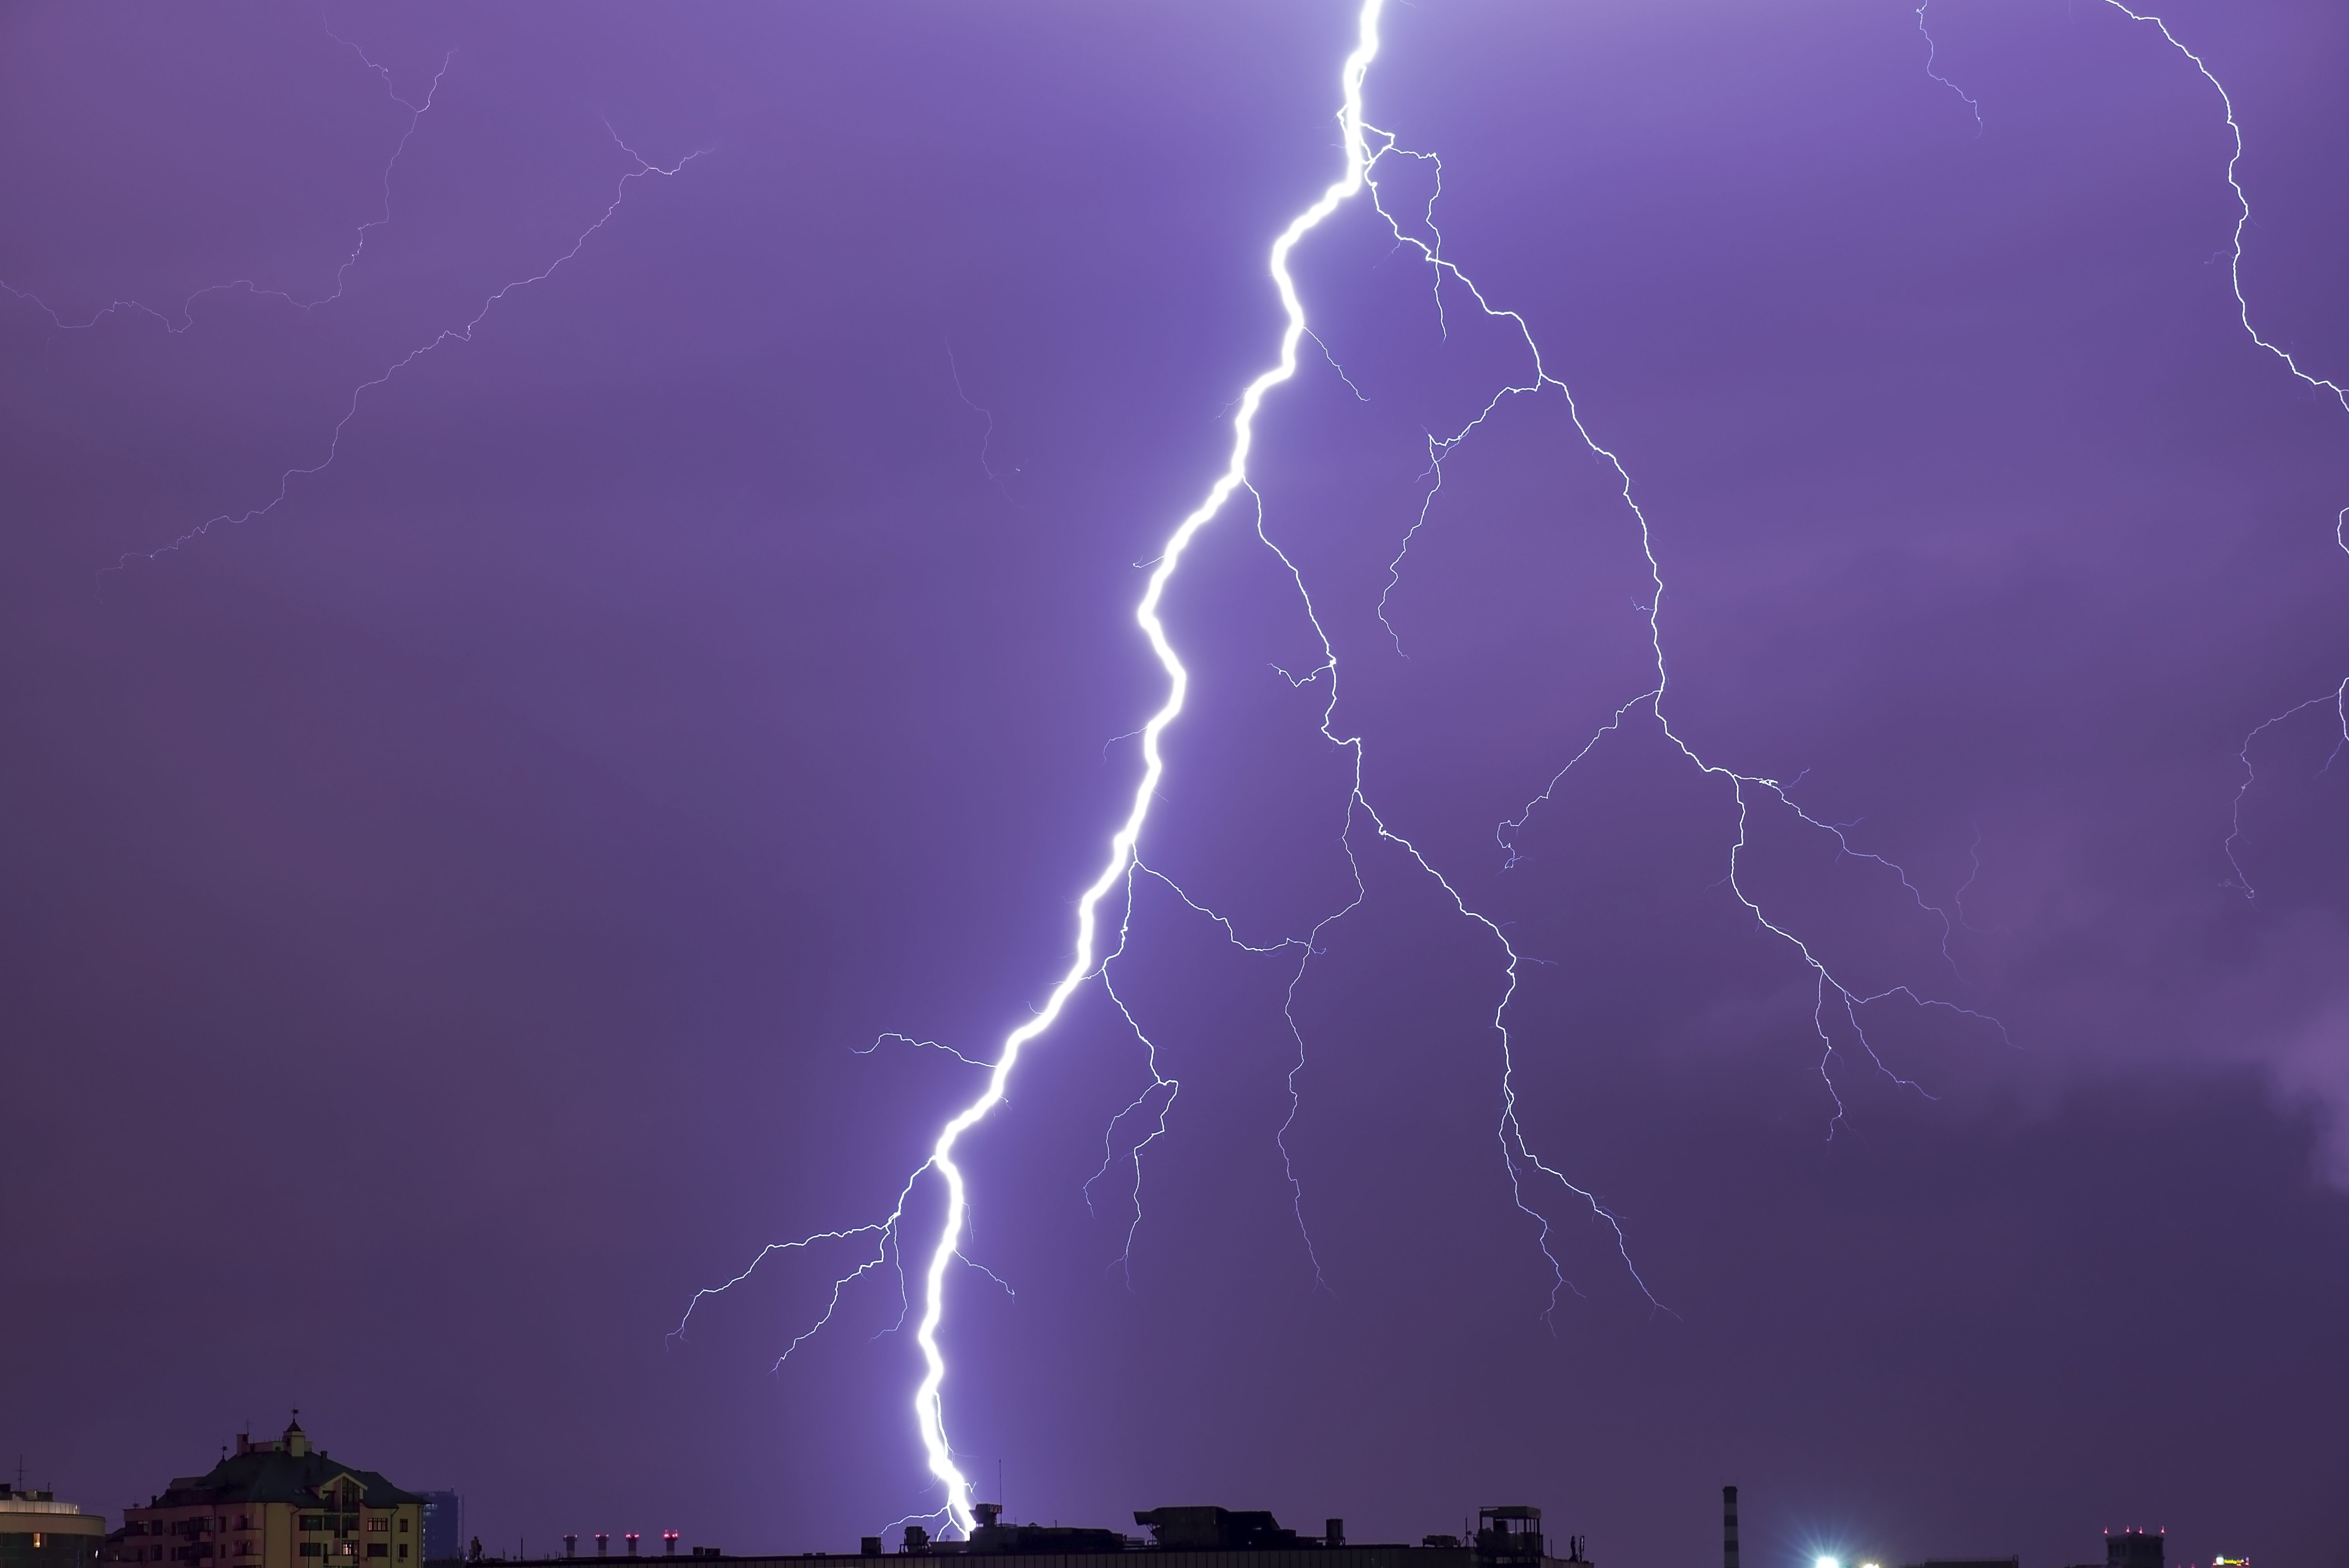 Struck By Lightning: Health Effects and What It Does to the Body